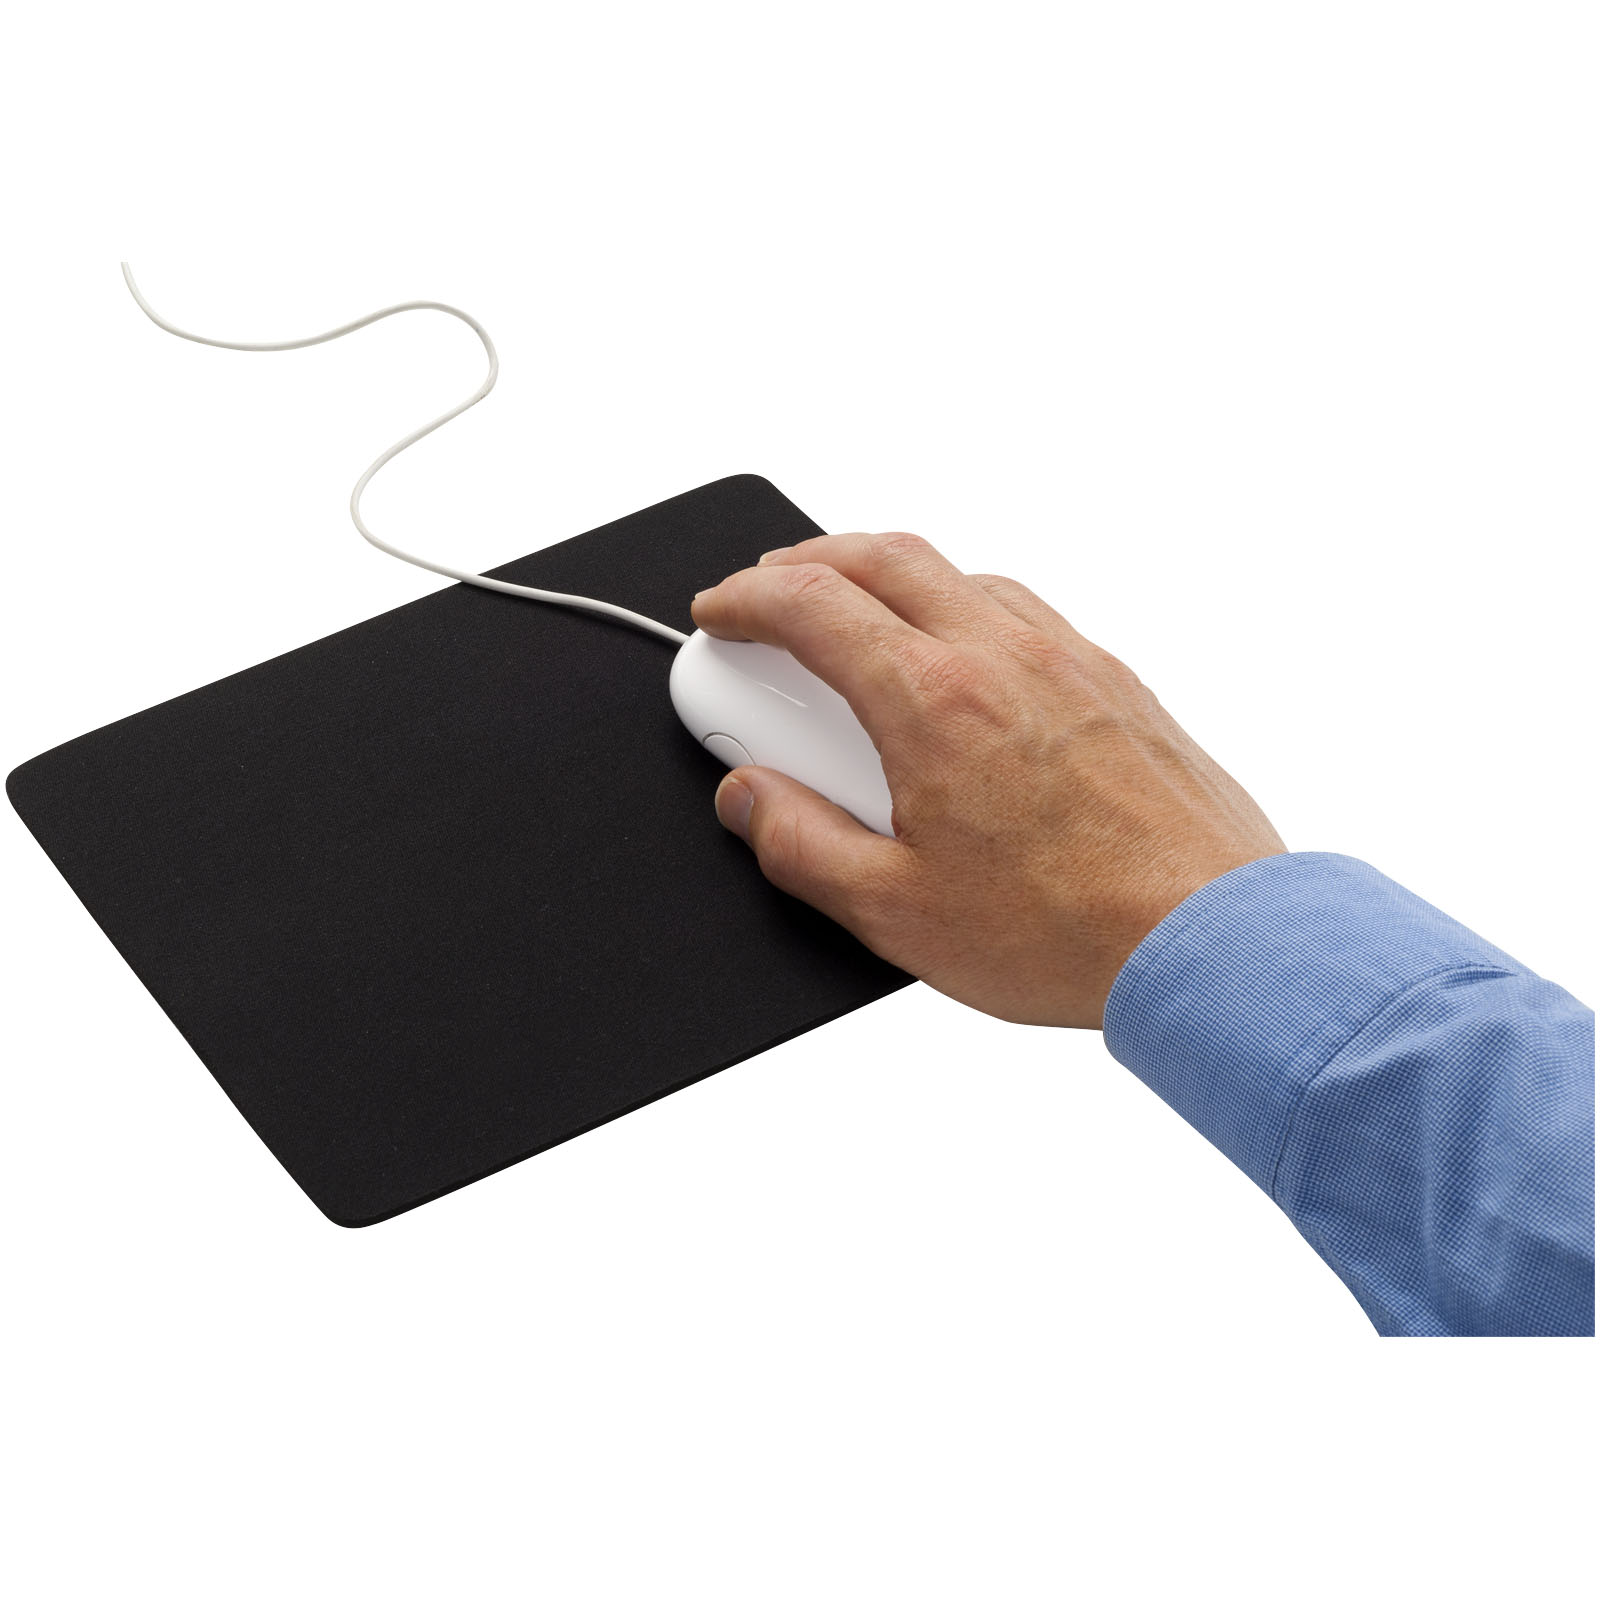 Advertising Desk Accessories - Heli flexible mouse pad - 1